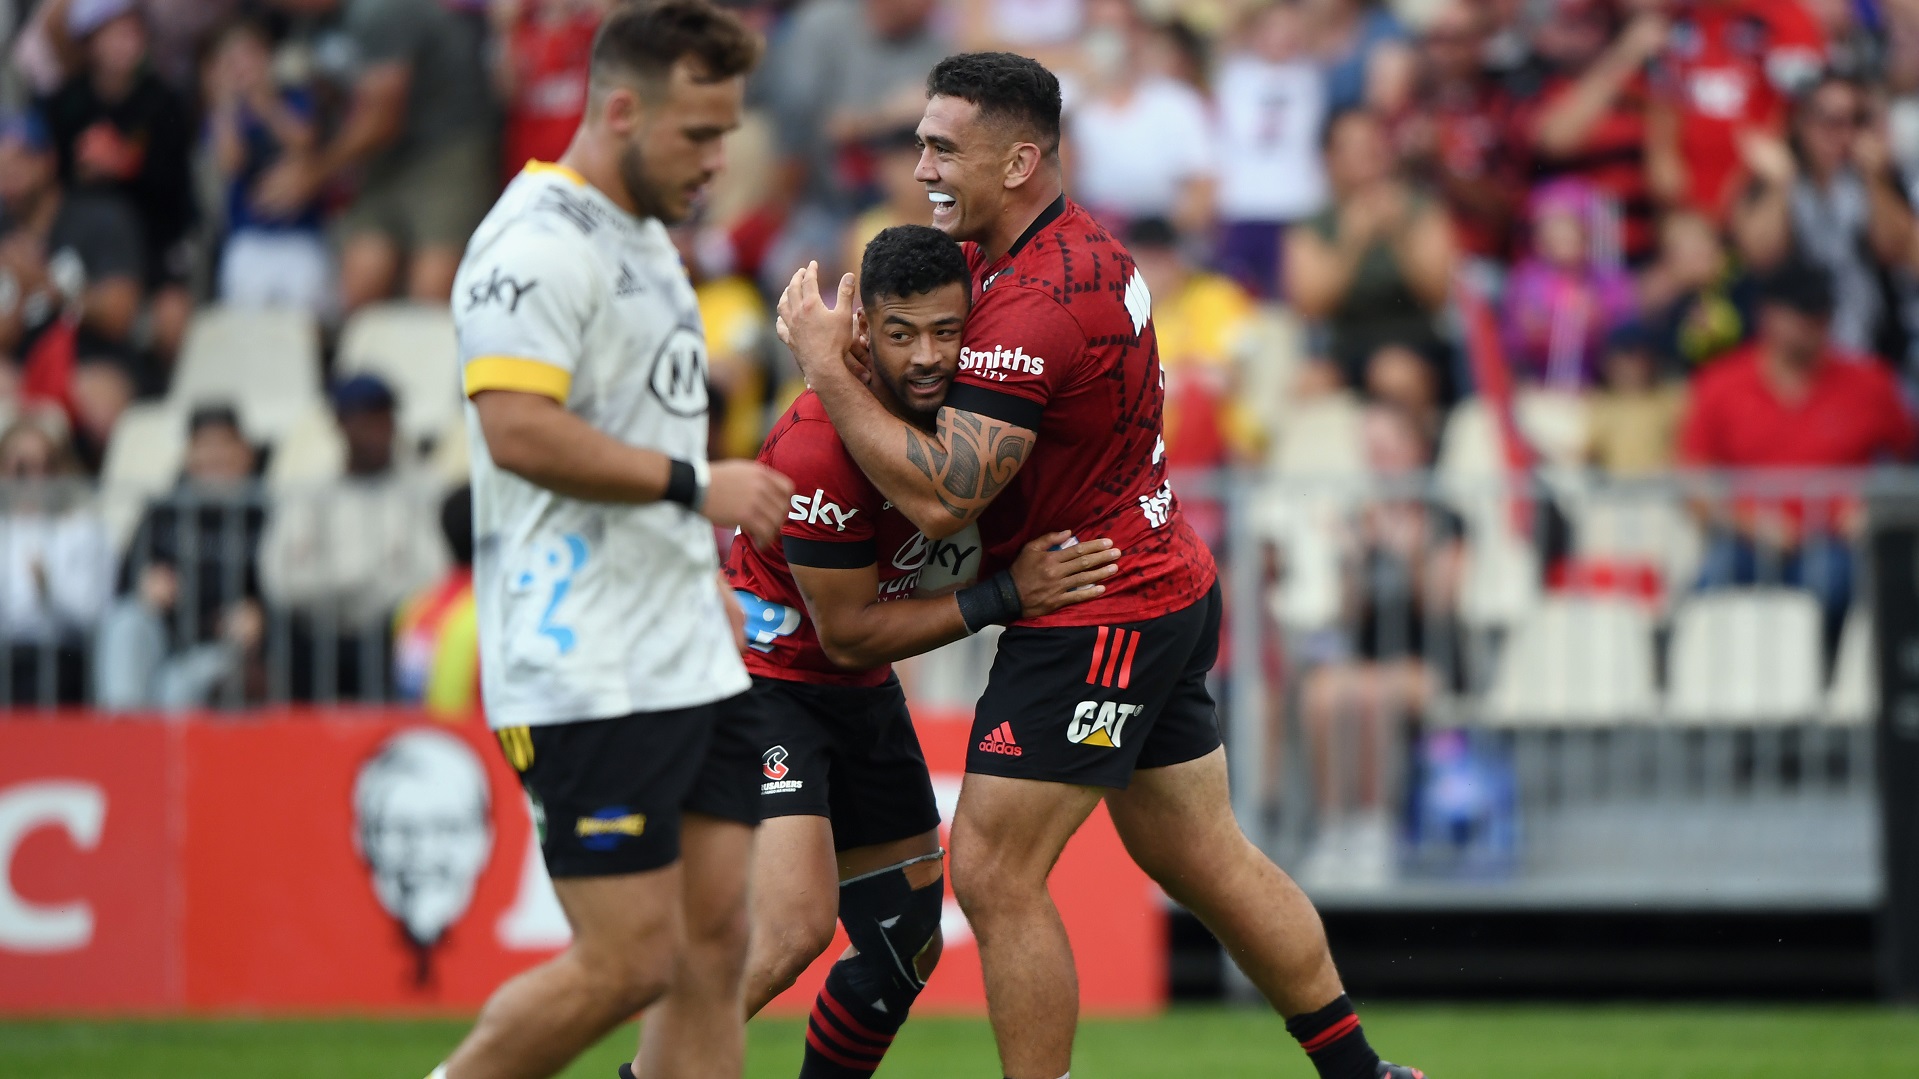 Codie Taylor scored twice as 2019 Super Rugby champions the Crusaders defeated the Hurricanes 33-16.